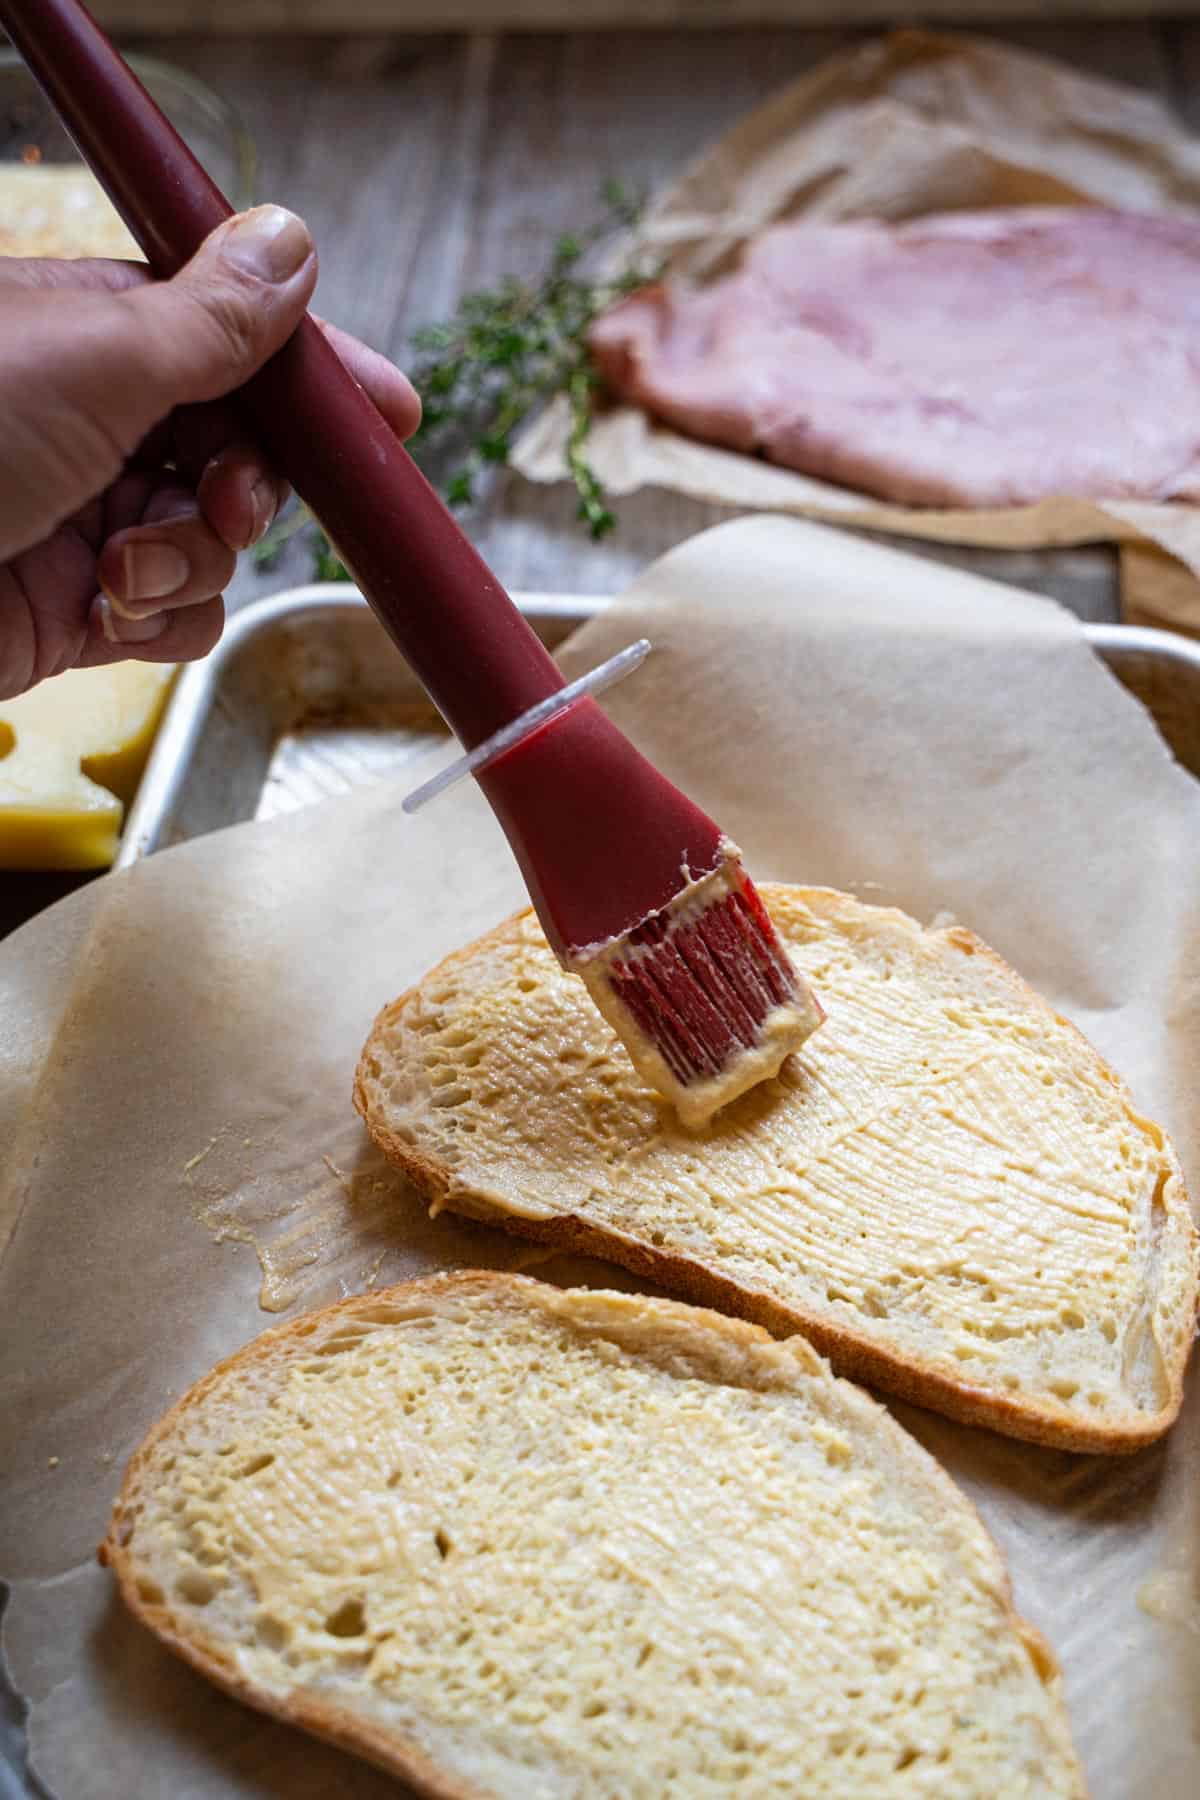 hand holding a basting brush to spread slice of bread with mustard